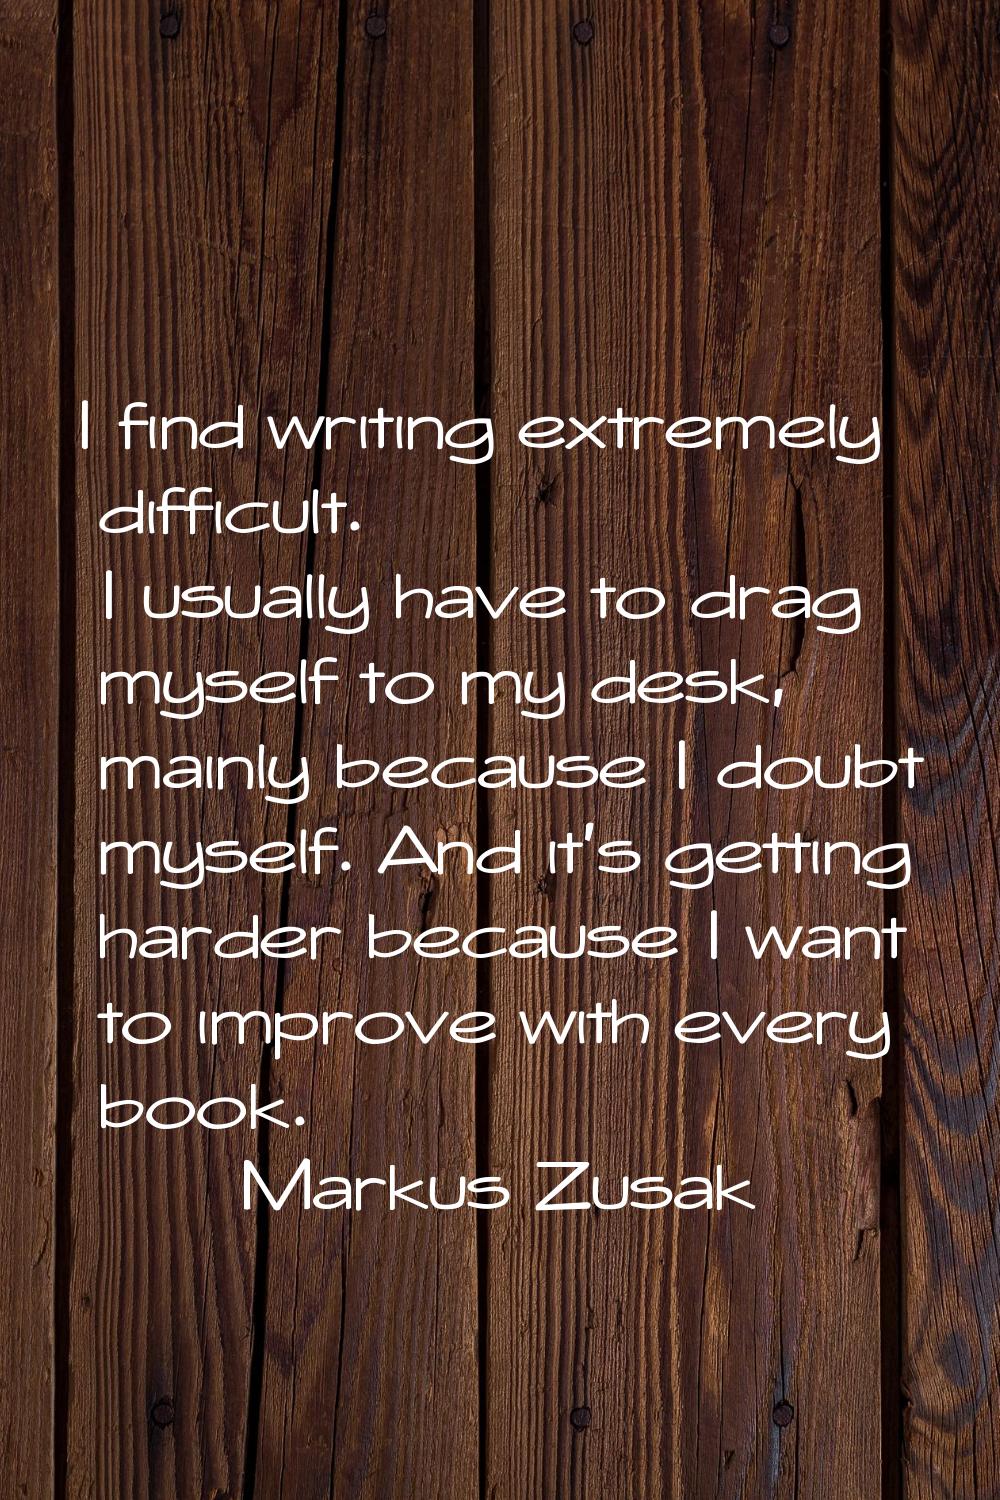 I find writing extremely difficult. I usually have to drag myself to my desk, mainly because I doub